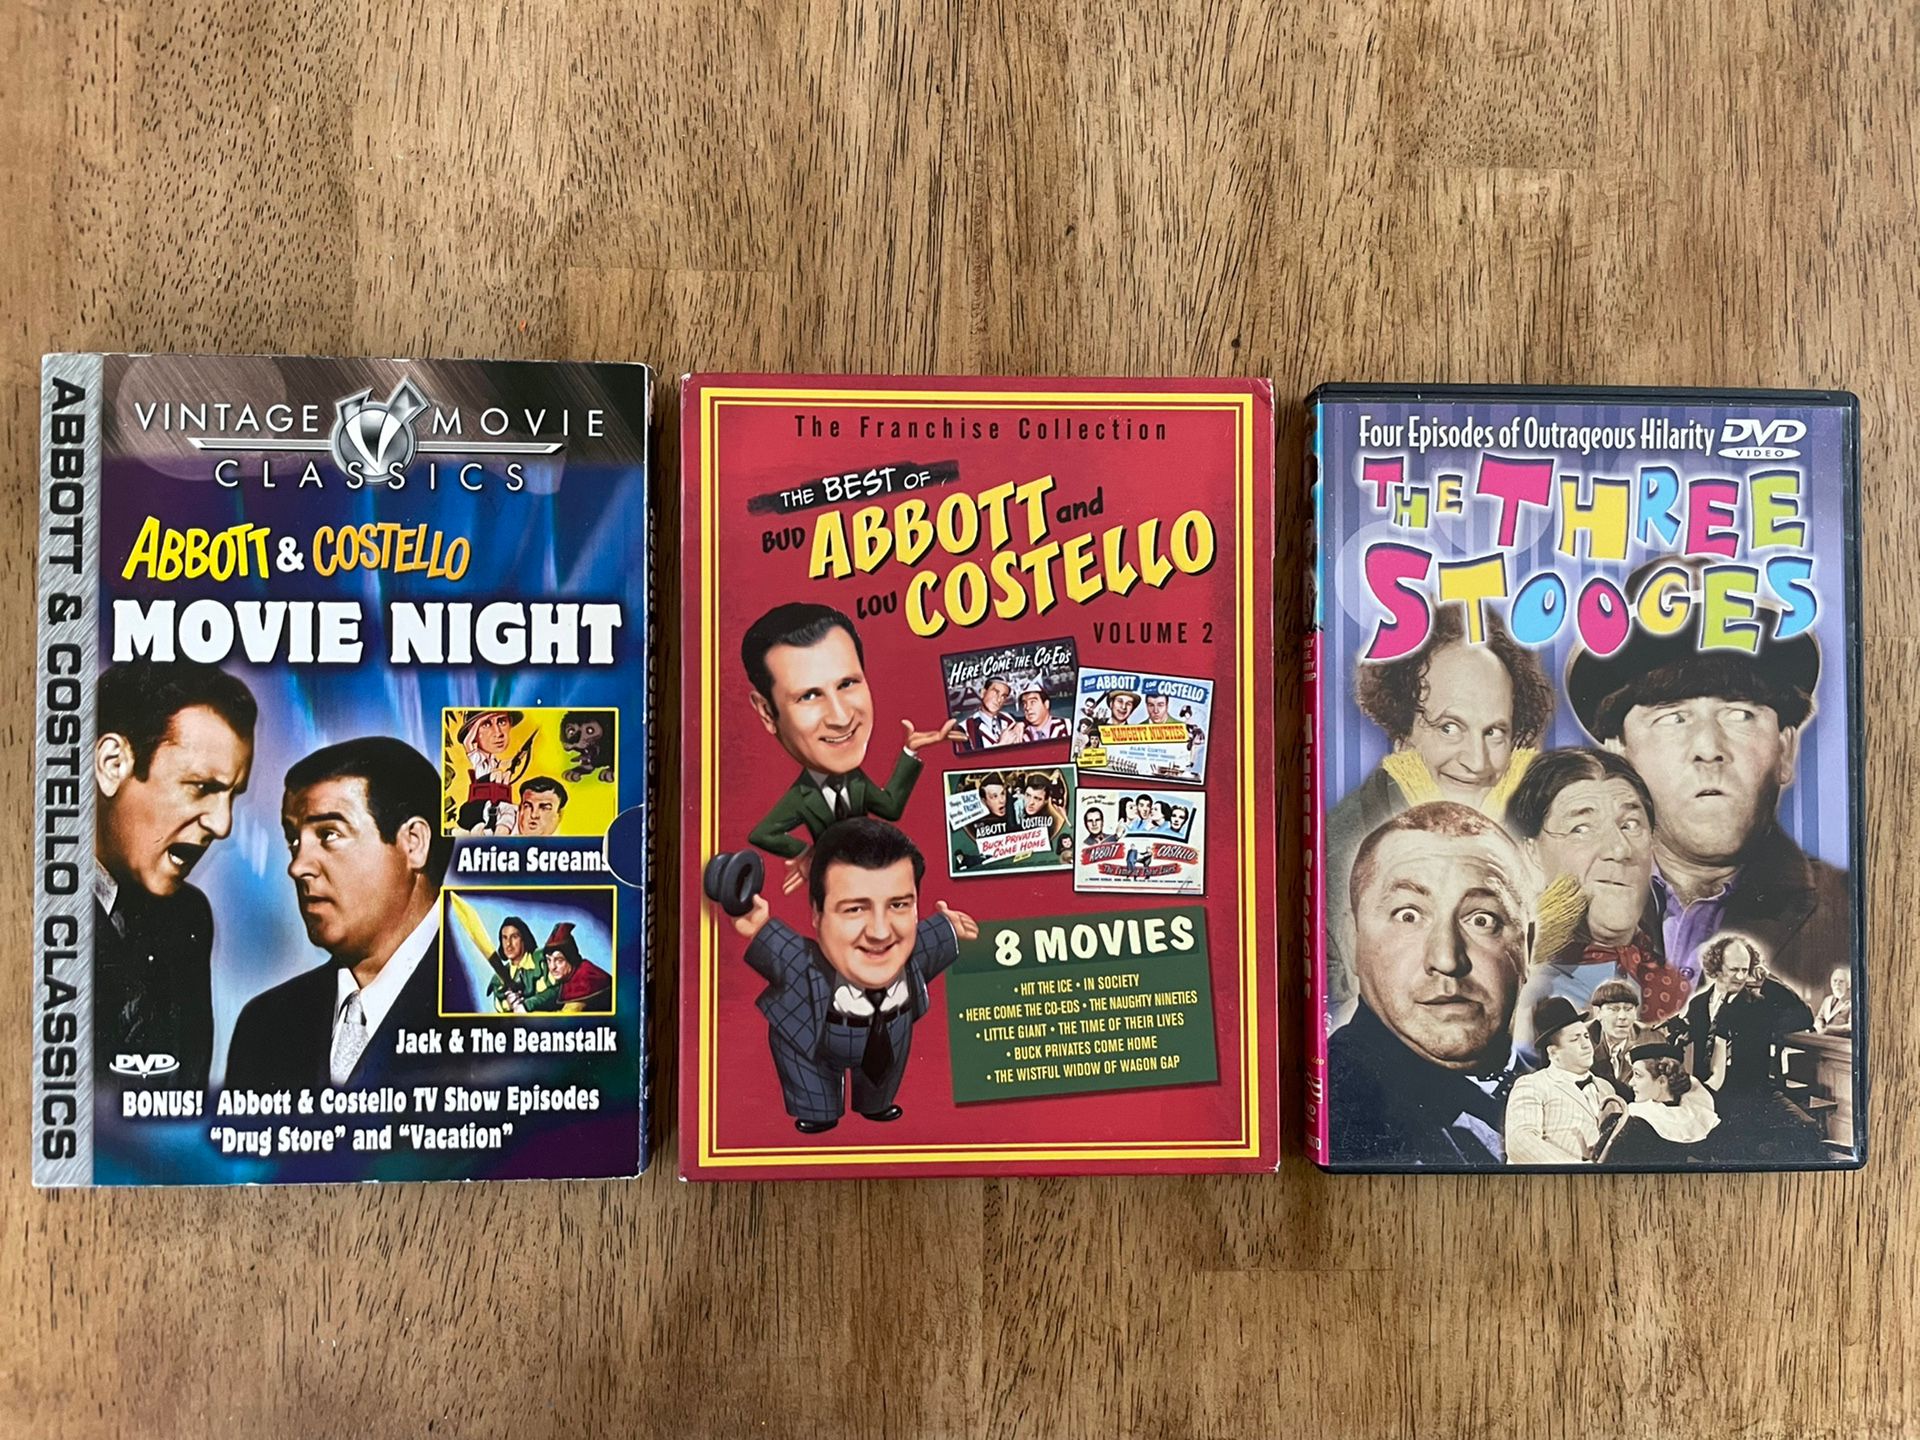 Abbott and Costello and Three Stooges DVD’s